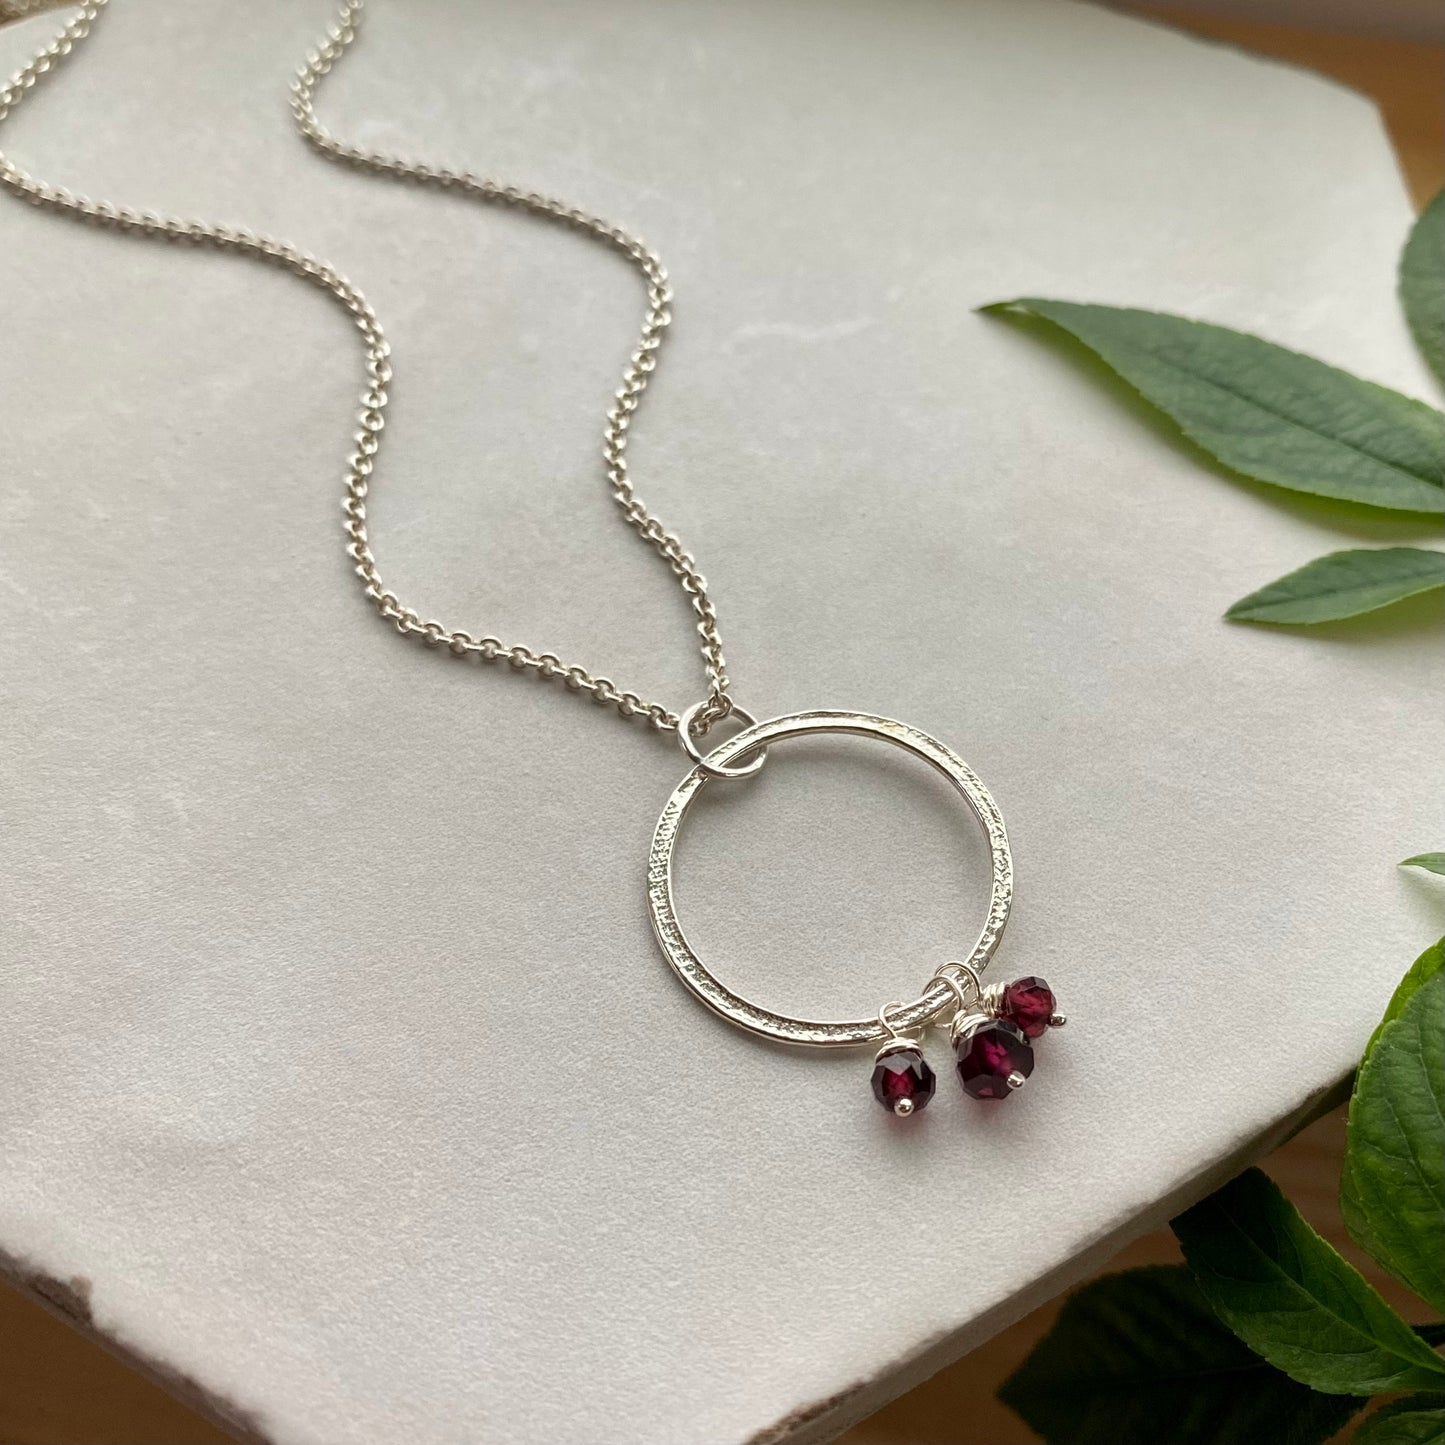 Gemstone Charm Necklace - Bold Version, Sterling Silver Sparkly Perfectly Imperfect Circles Pendant with Choice of Gemstone Birthstones